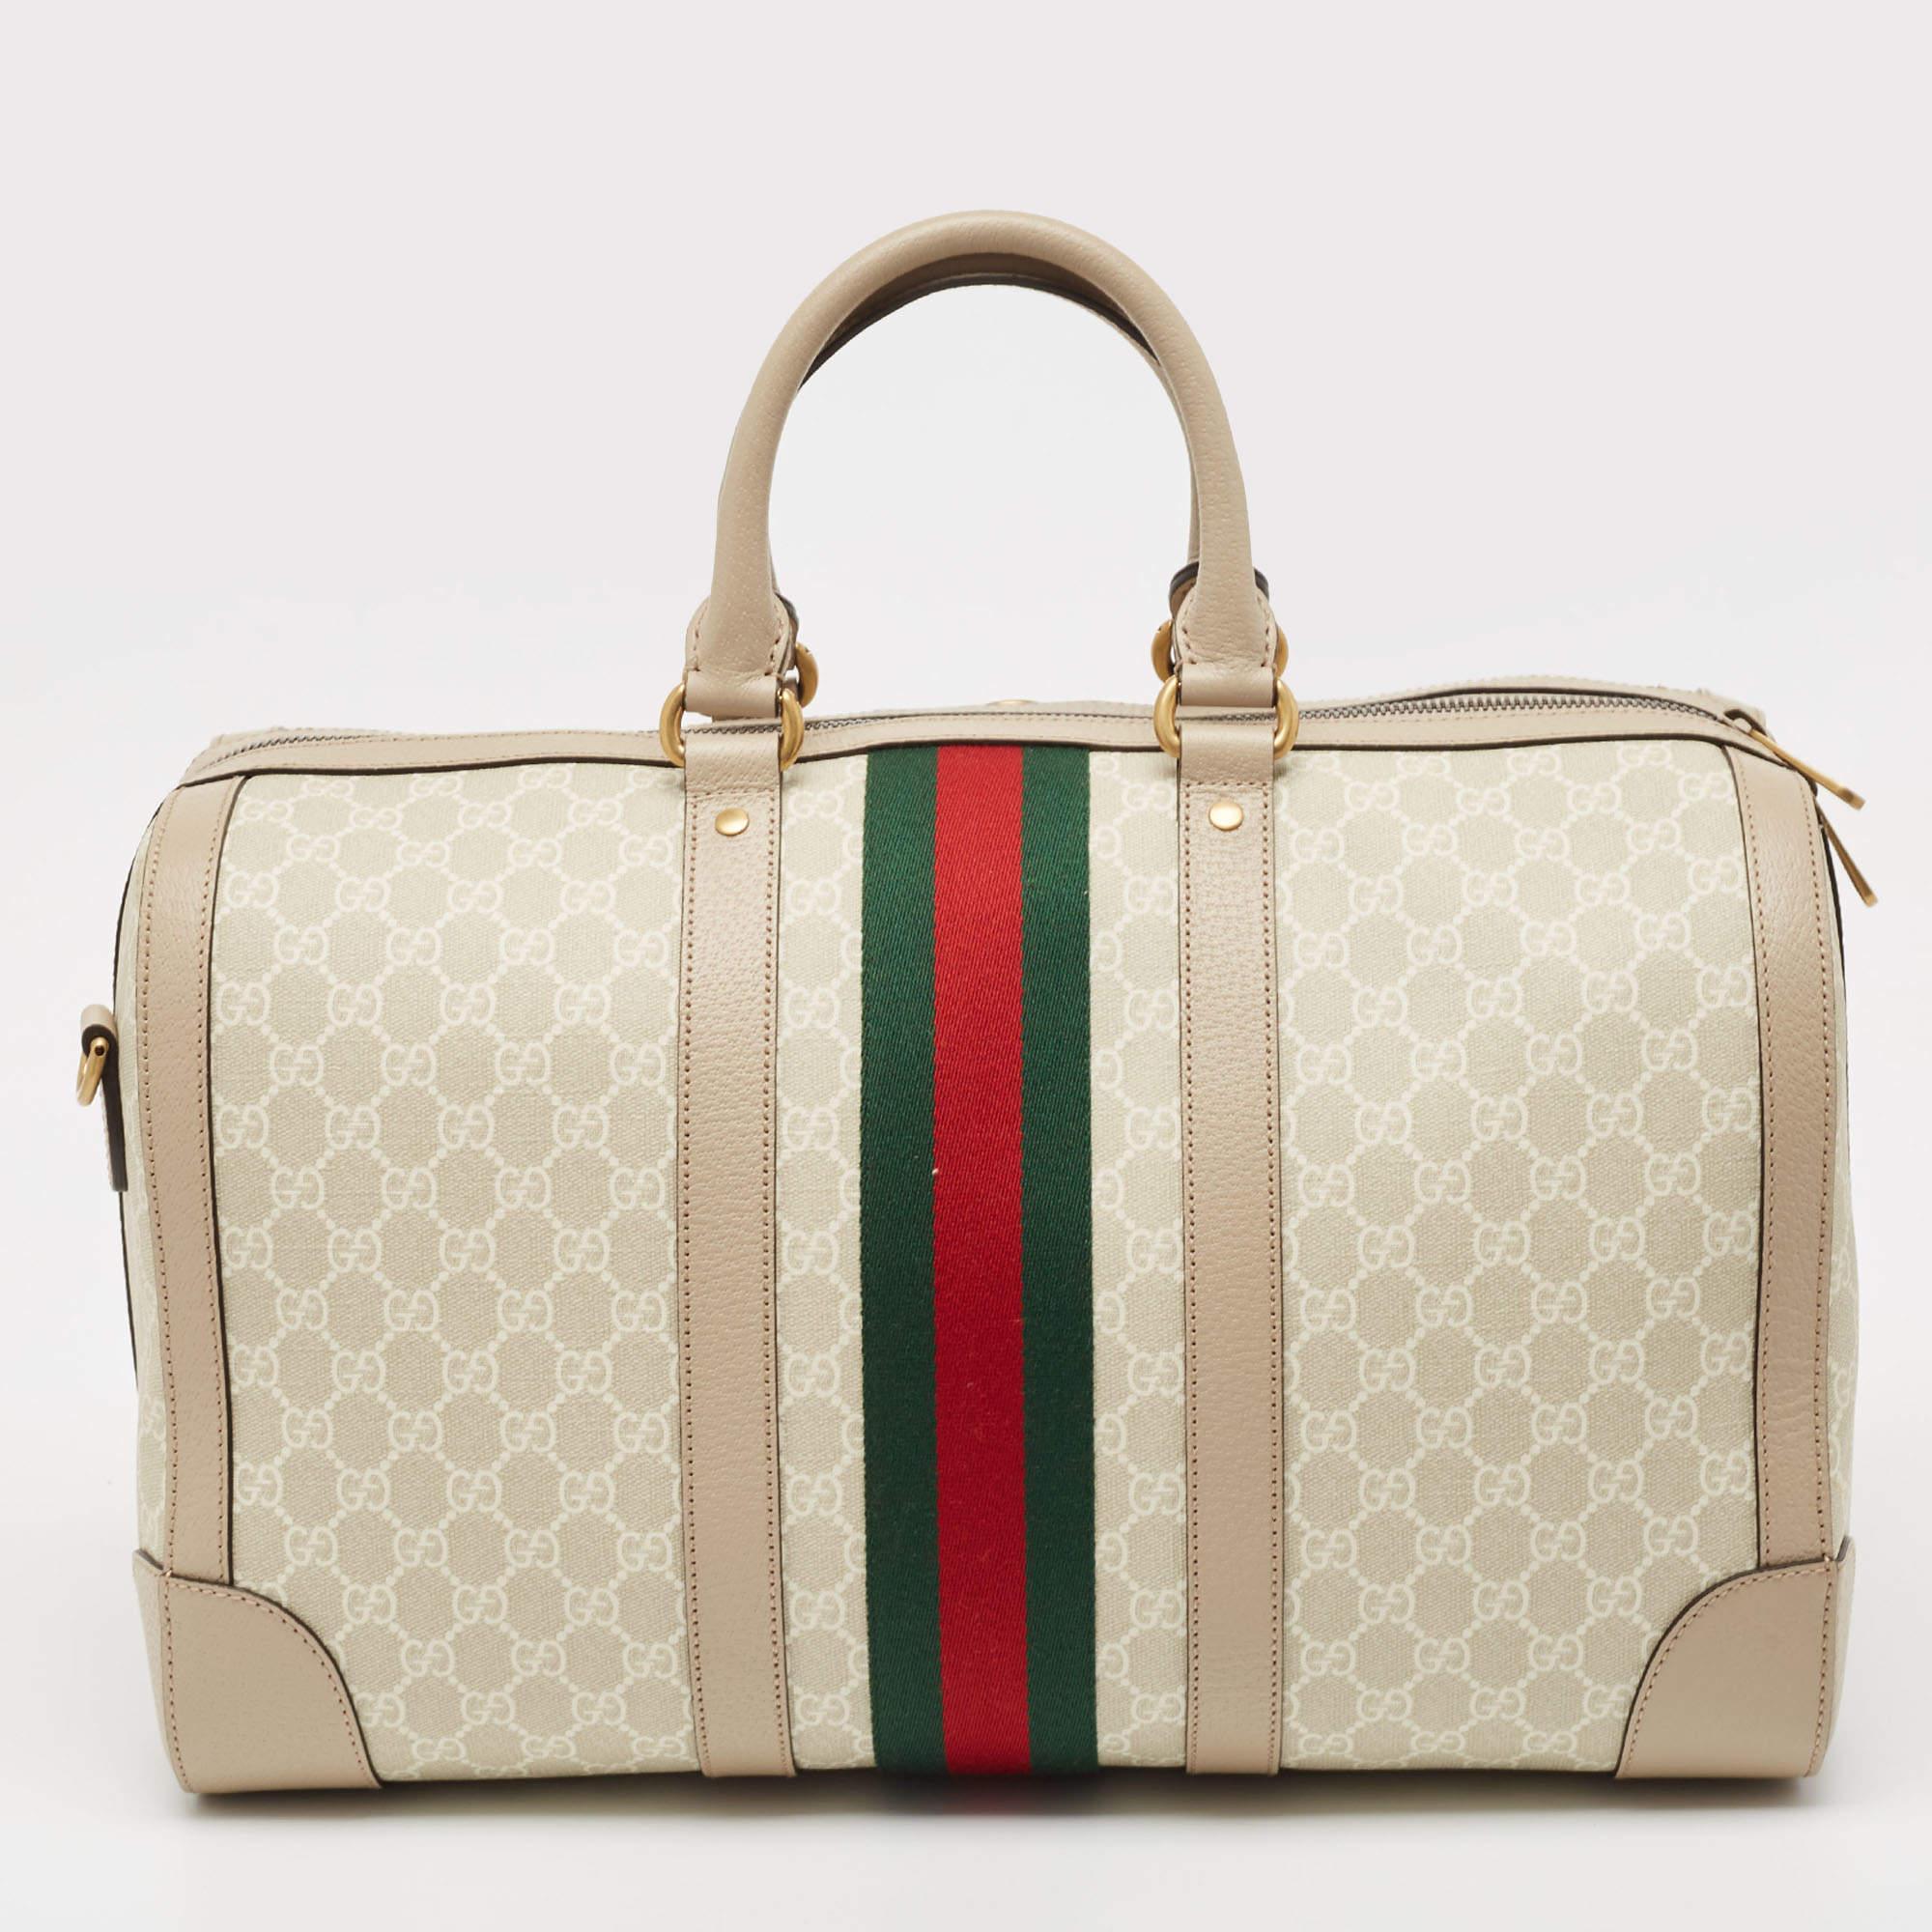 Ensure your travel essentials are in order and your outfit is complete with this Gucci bag. Crafted using the best materials, the bag carries the maison's signature of artful craftsmanship and enduring appeal.

Includes: Original Dustbag, Info